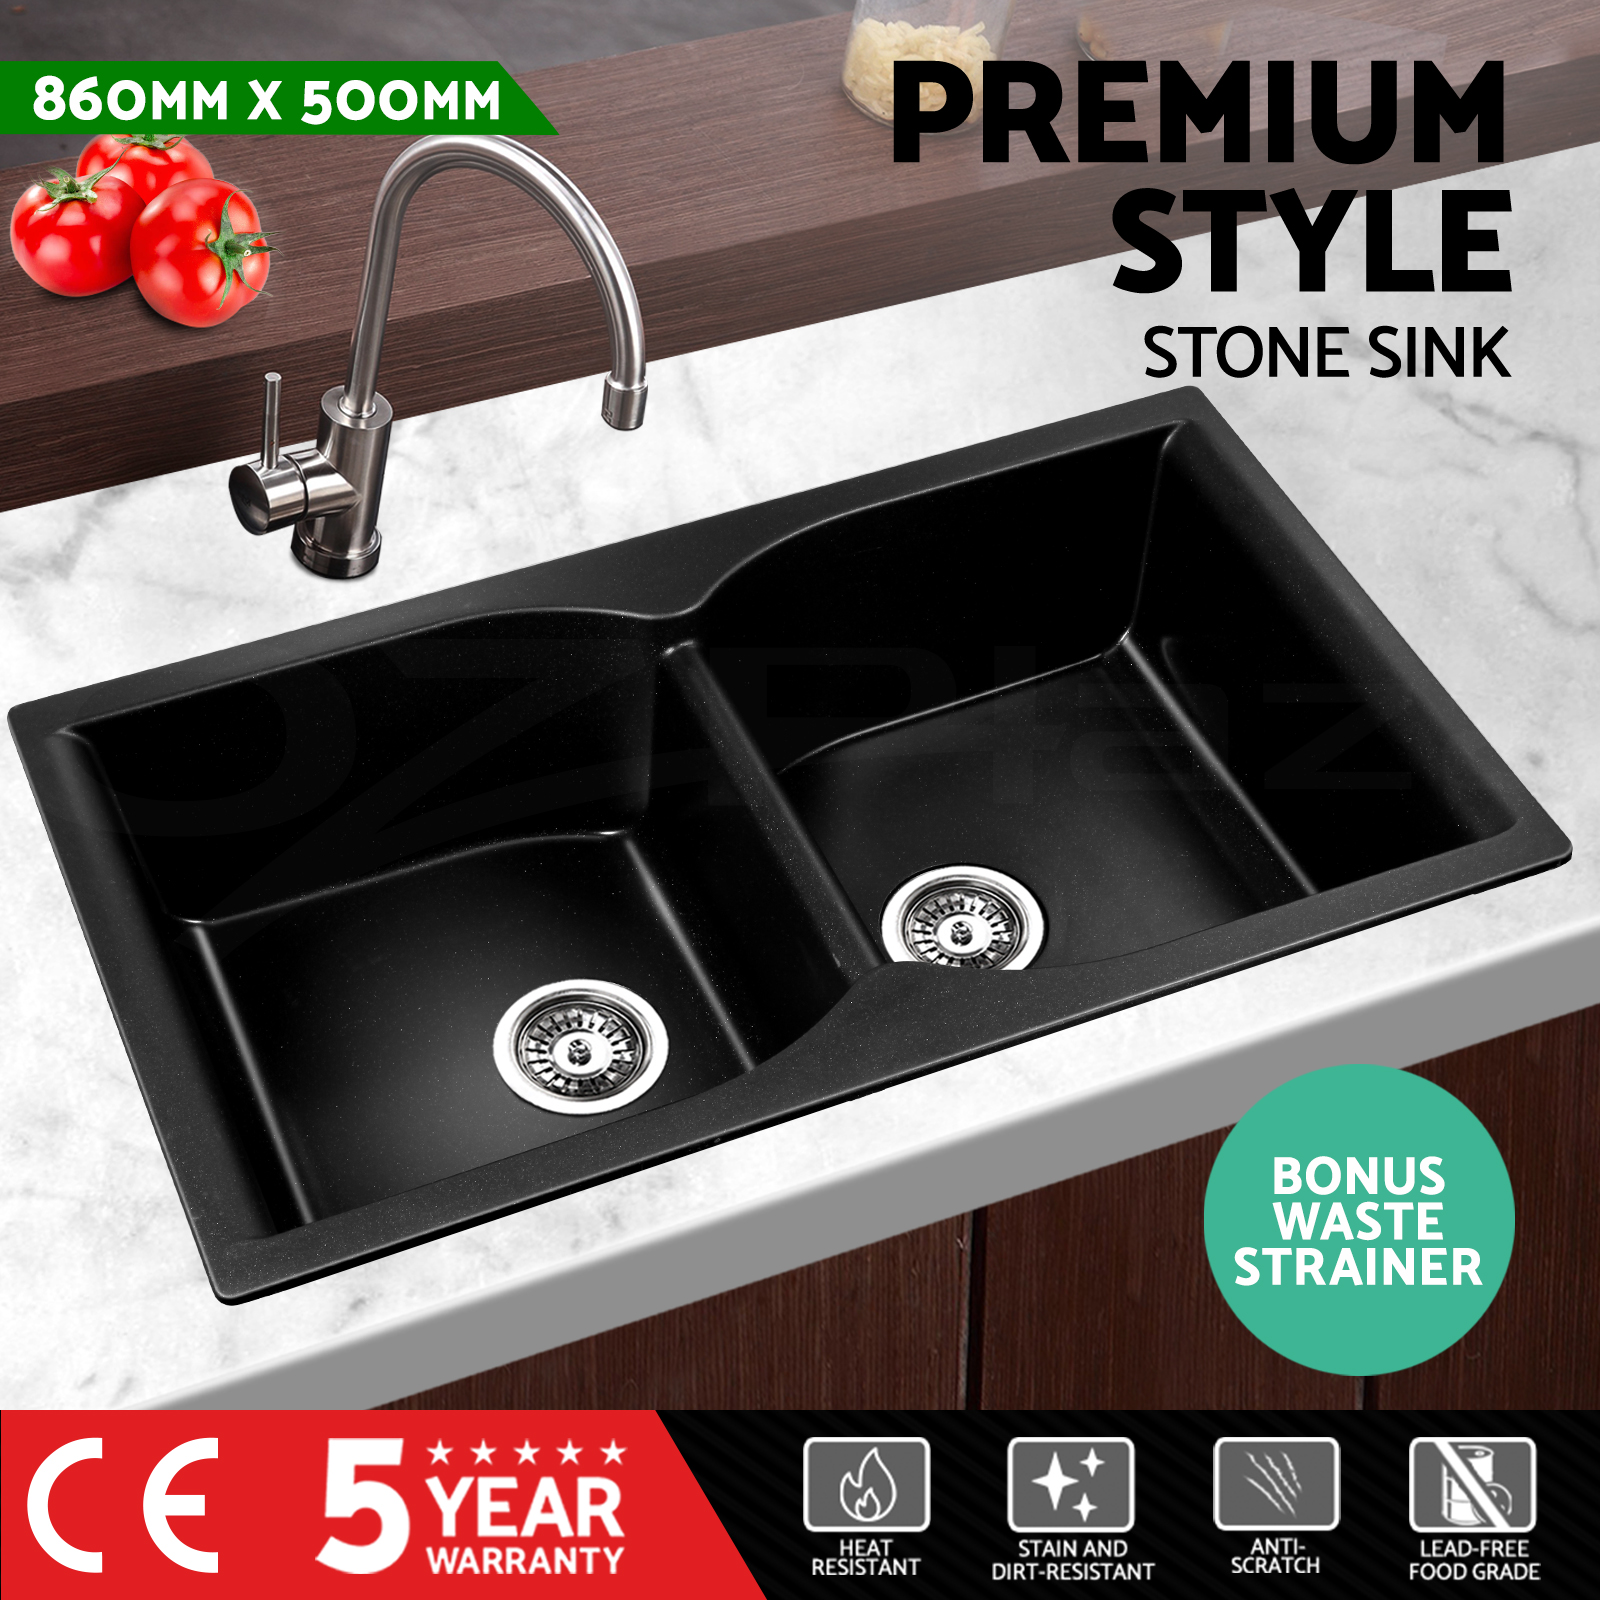 Details About Cefito Kitchen Sink Stone Granite Black Top Undermount Double Bowl 860x500mm